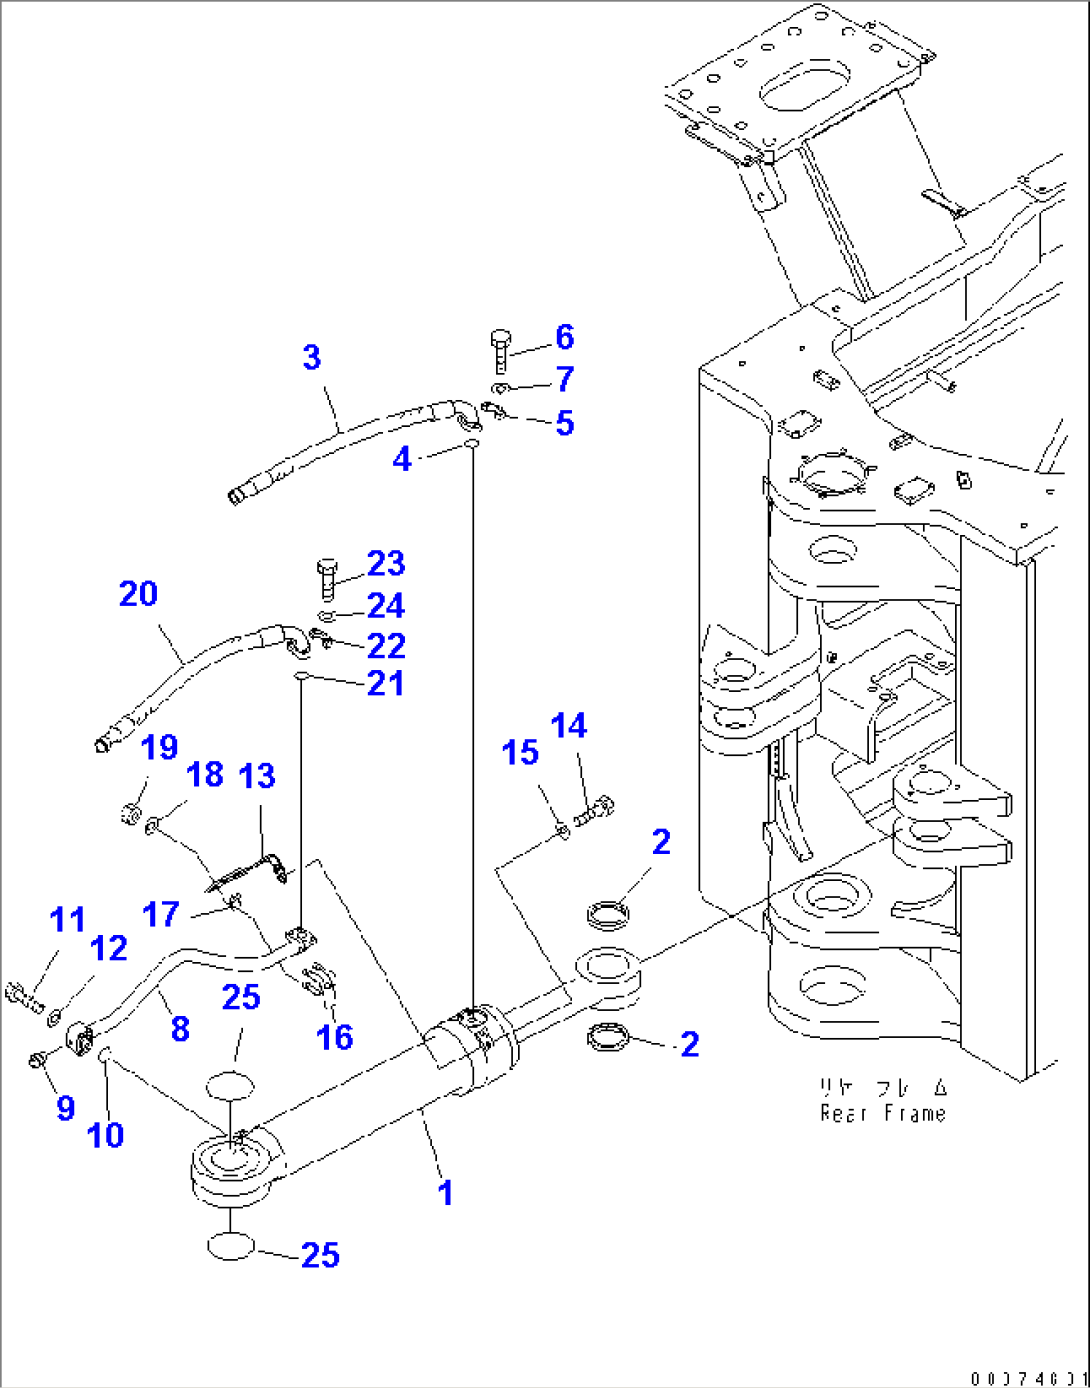 STEERING CYLINDER (CYLINDER AND PIPING¤ L.H.)(#51075-)